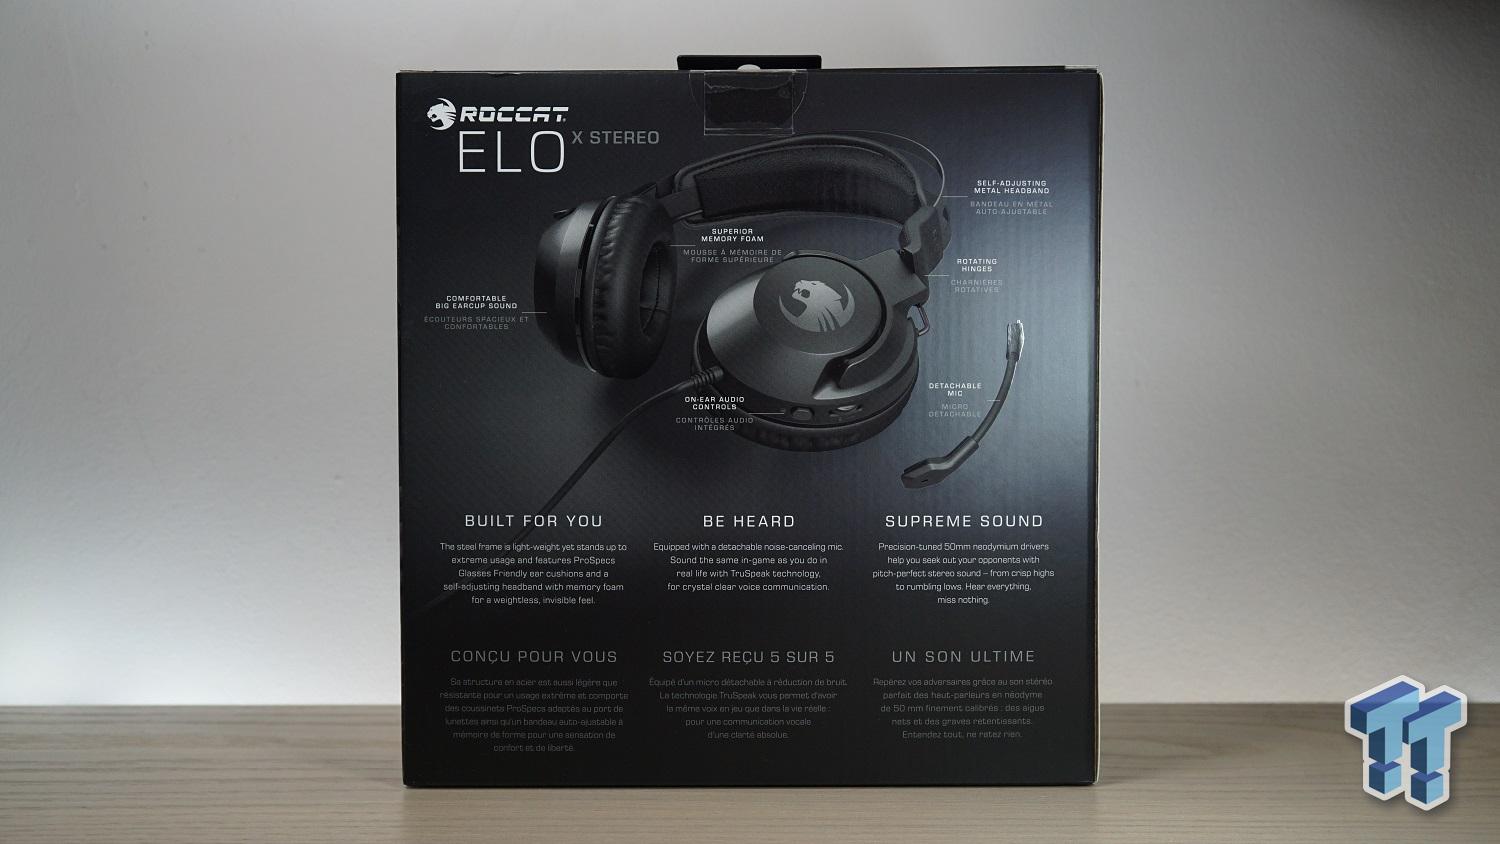 Fnatic Casque Gaming Gear Duel (Over-Ear et on-Ear, Microphone